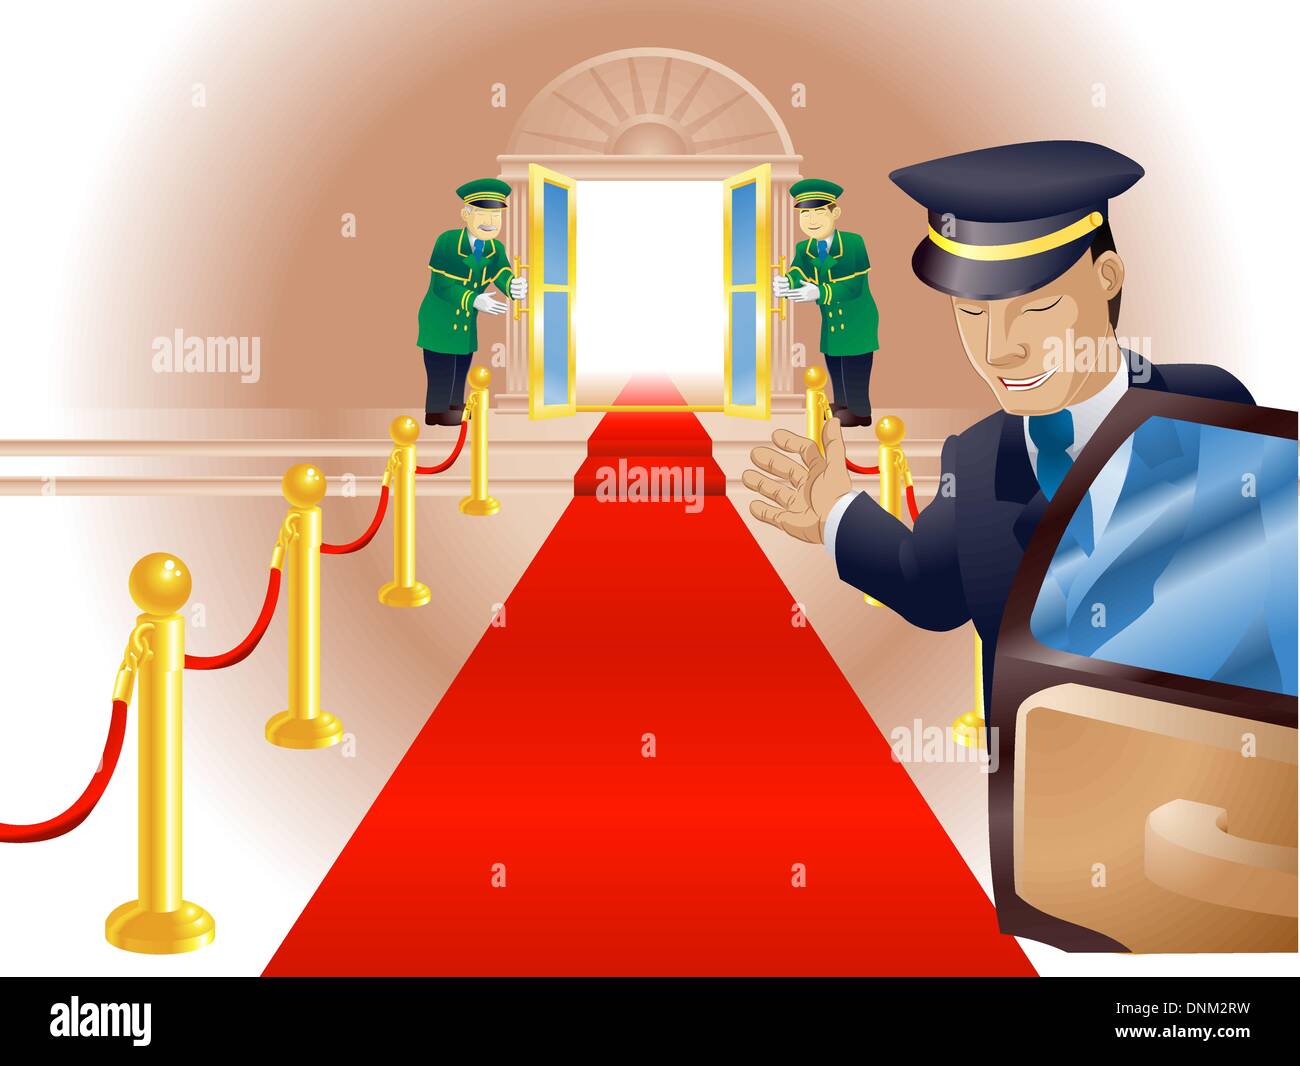 Illustration, point of view of person getting out of a limousine with chauffer and doormen beckoning him or her into a venue lik Stock Vector